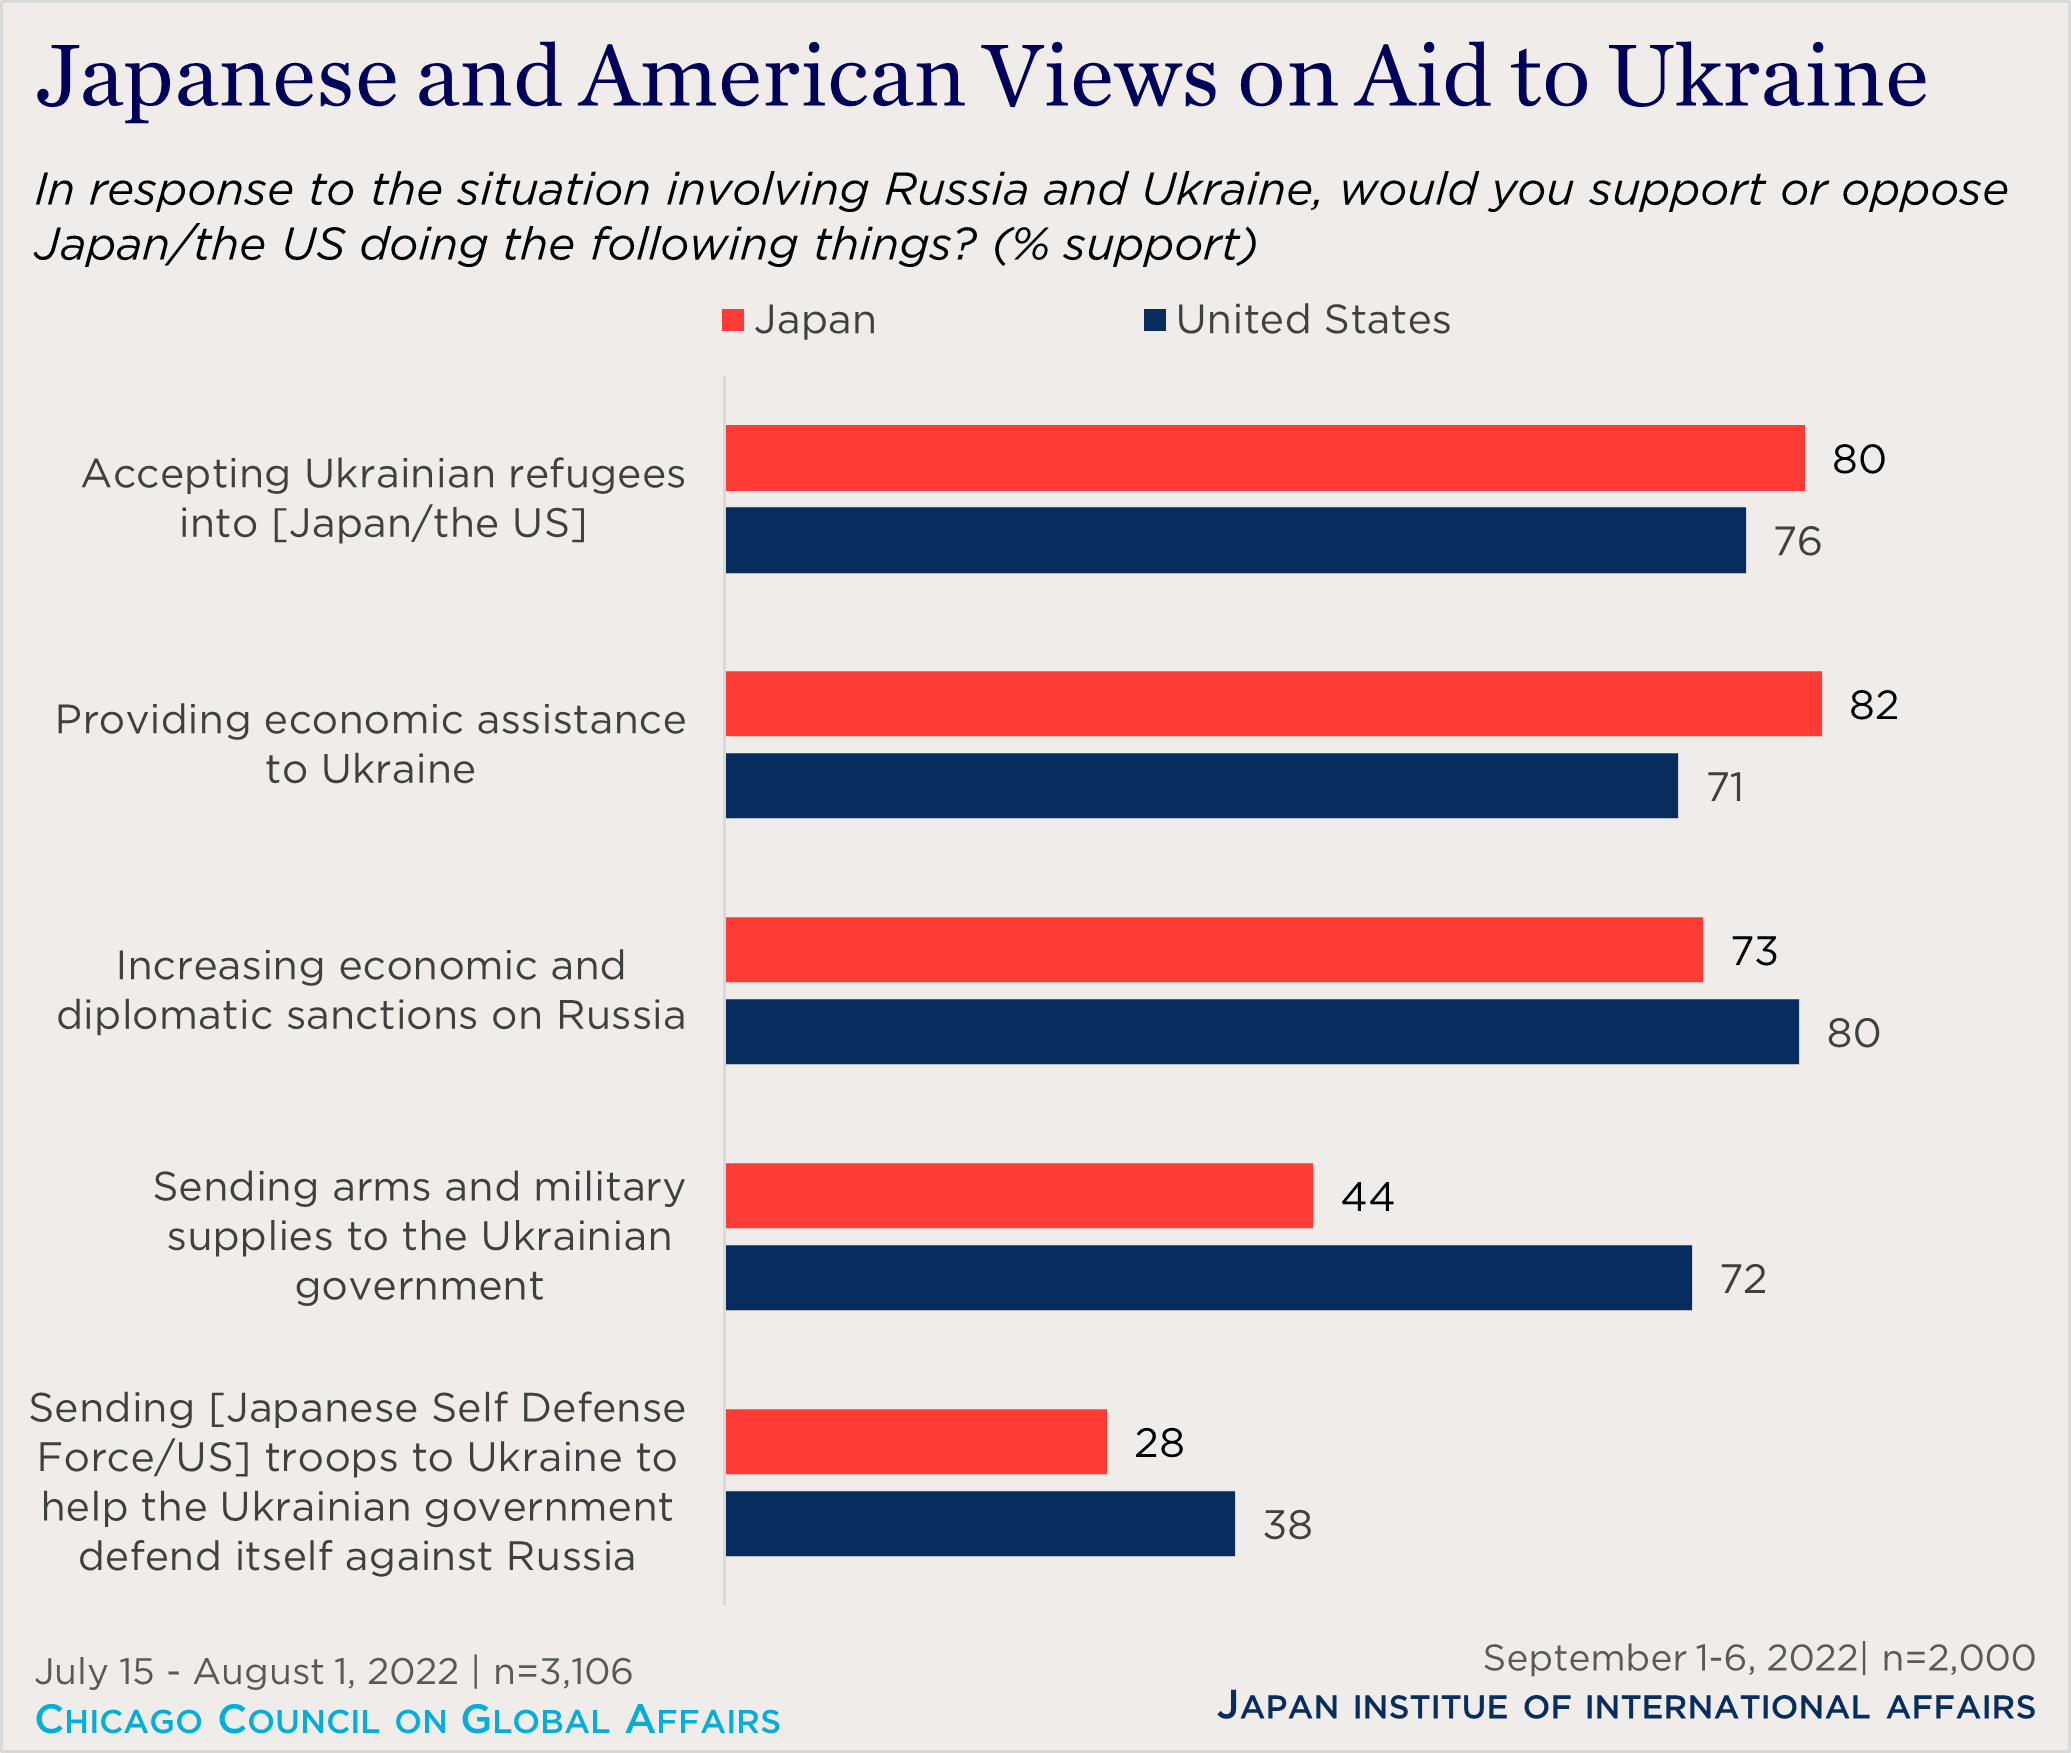 "bar chart showing views on aid to Ukraine"